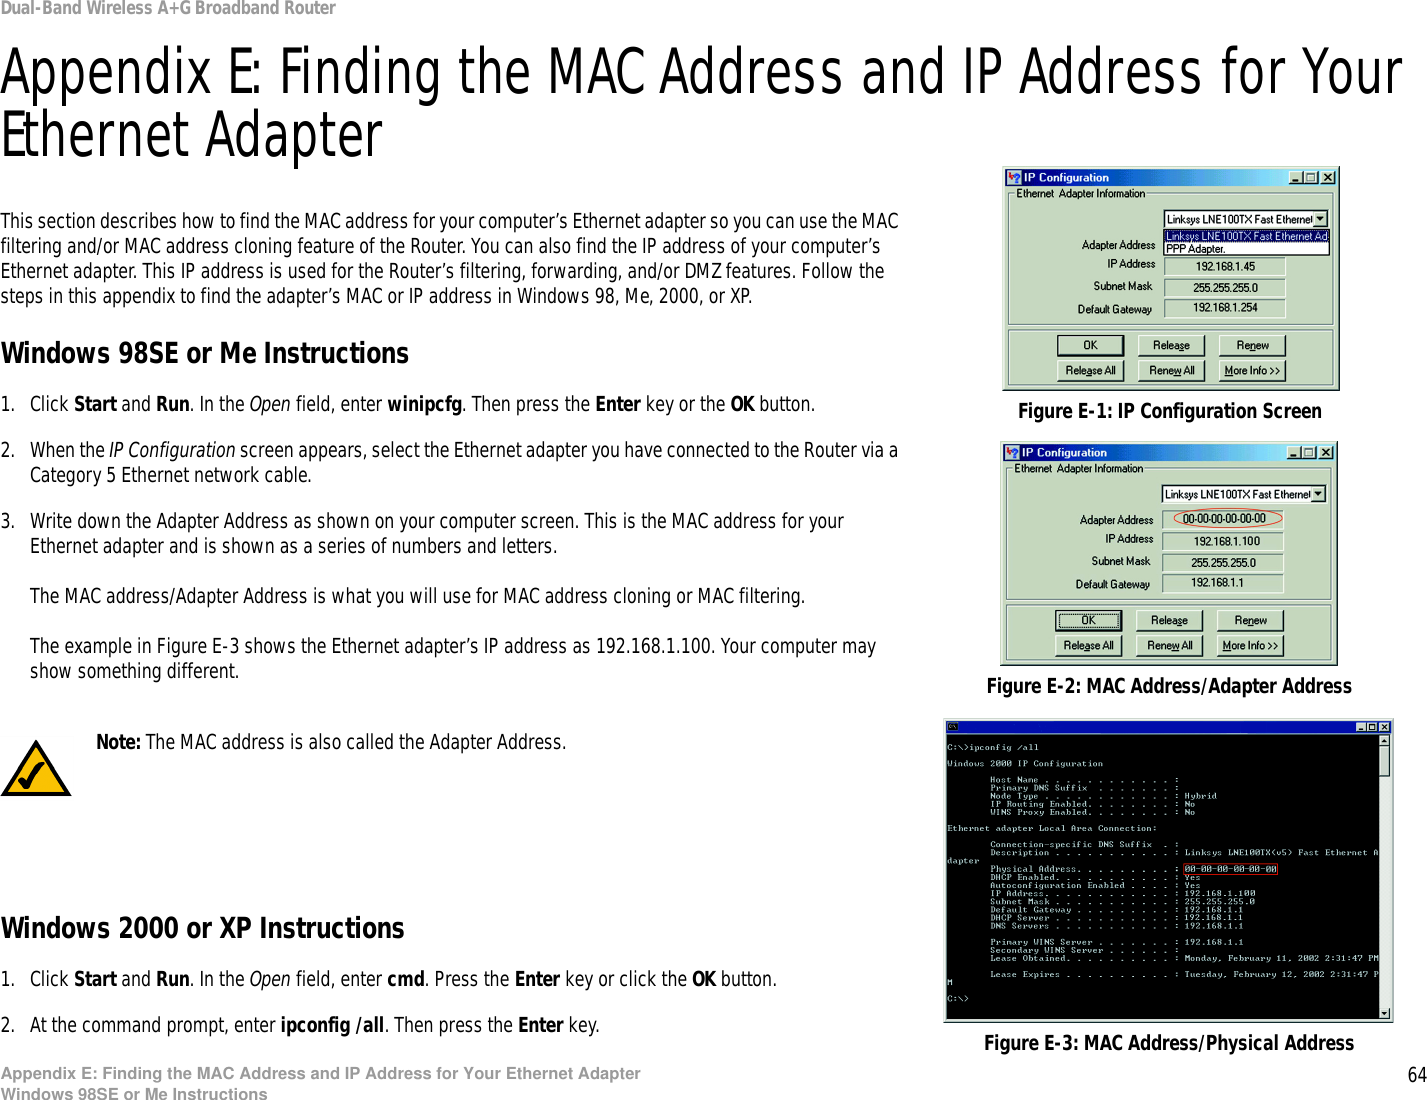 64Appendix E: Finding the MAC Address and IP Address for Your Ethernet AdapterWindows 98SE or Me InstructionsDual-Band Wireless A+G Broadband RouterAppendix E: Finding the MAC Address and IP Address for Your Ethernet AdapterThis section describes how to find the MAC address for your computer’s Ethernet adapter so you can use the MAC filtering and/or MAC address cloning feature of the Router. You can also find the IP address of your computer’s Ethernet adapter. This IP address is used for the Router’s filtering, forwarding, and/or DMZ features. Follow the steps in this appendix to find the adapter’s MAC or IP address in Windows 98, Me, 2000, or XP.Windows 98SE or Me Instructions1. Click Start and Run. In the Open field, enter winipcfg. Then press the Enter key or the OK button. 2. When the IP Configuration screen appears, select the Ethernet adapter you have connected to the Router via a Category 5 Ethernet network cable.3. Write down the Adapter Address as shown on your computer screen. This is the MAC address for your Ethernet adapter and is shown as a series of numbers and letters.The MAC address/Adapter Address is what you will use for MAC address cloning or MAC filtering.The example in Figure E-3 shows the Ethernet adapter’s IP address as 192.168.1.100. Your computer may show something different.Windows 2000 or XP Instructions1. Click Start and Run. In the Open field, enter cmd. Press the Enter key or click the OK button.2. At the command prompt, enter ipconfig /all. Then press the Enter key.Figure E-2: MAC Address/Adapter AddressFigure E-1: IP Configuration ScreenNote: The MAC address is also called the Adapter Address.Figure E-3: MAC Address/Physical Address